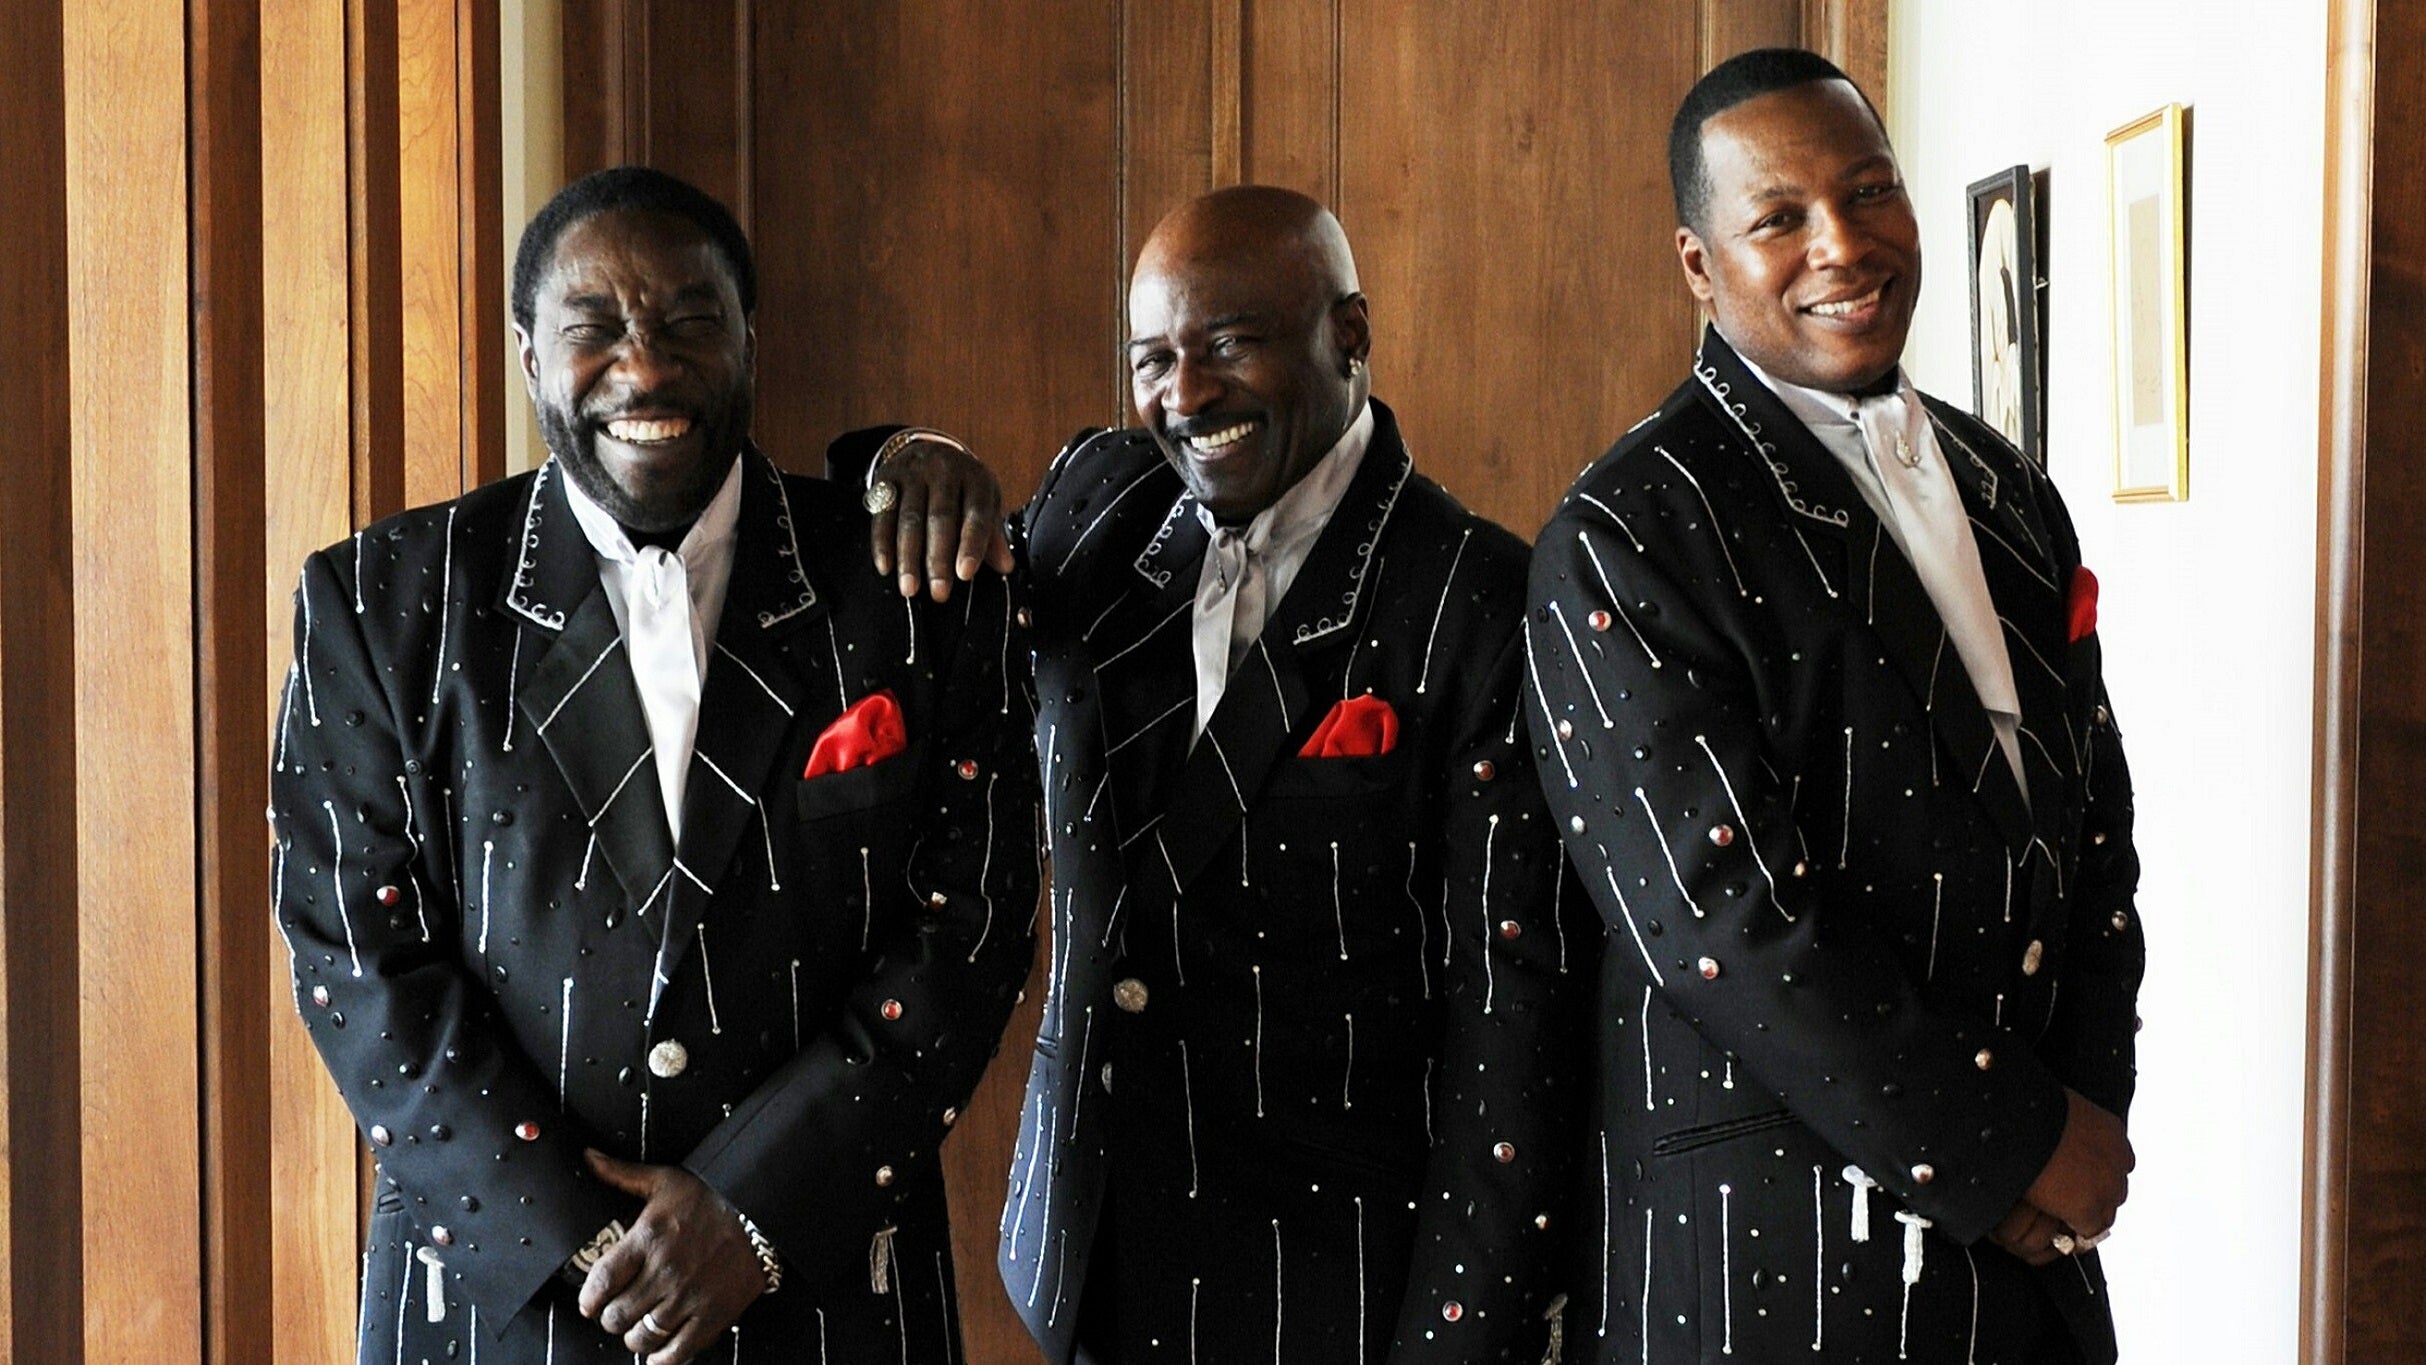 The O'Jays in Atlantic City promo photo for VIP Package presale offer code